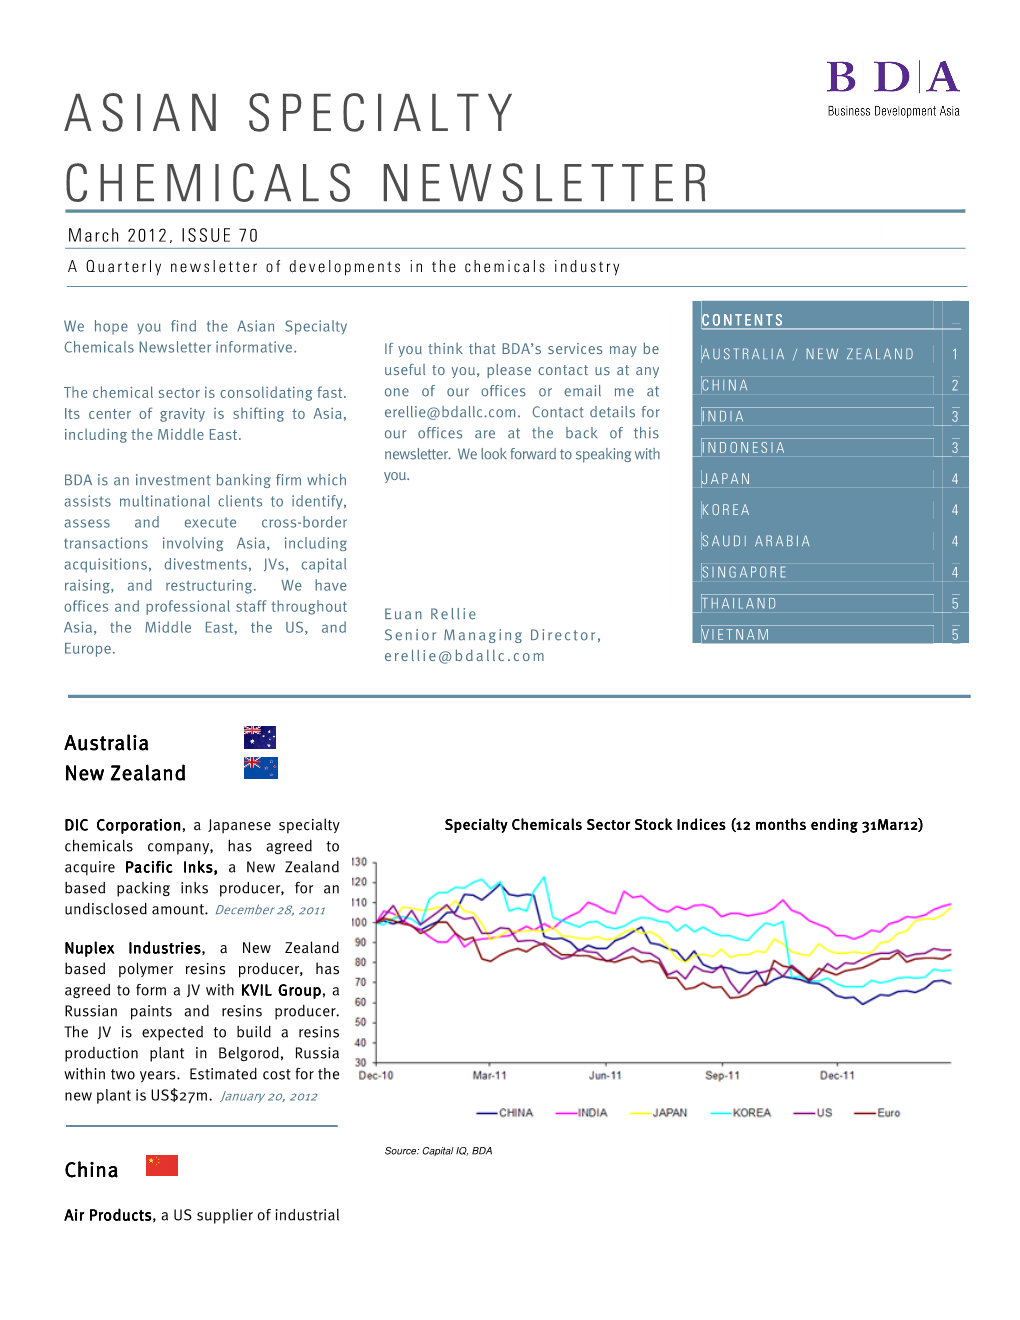 Asian Specialty Chemicals Newsletter Informative